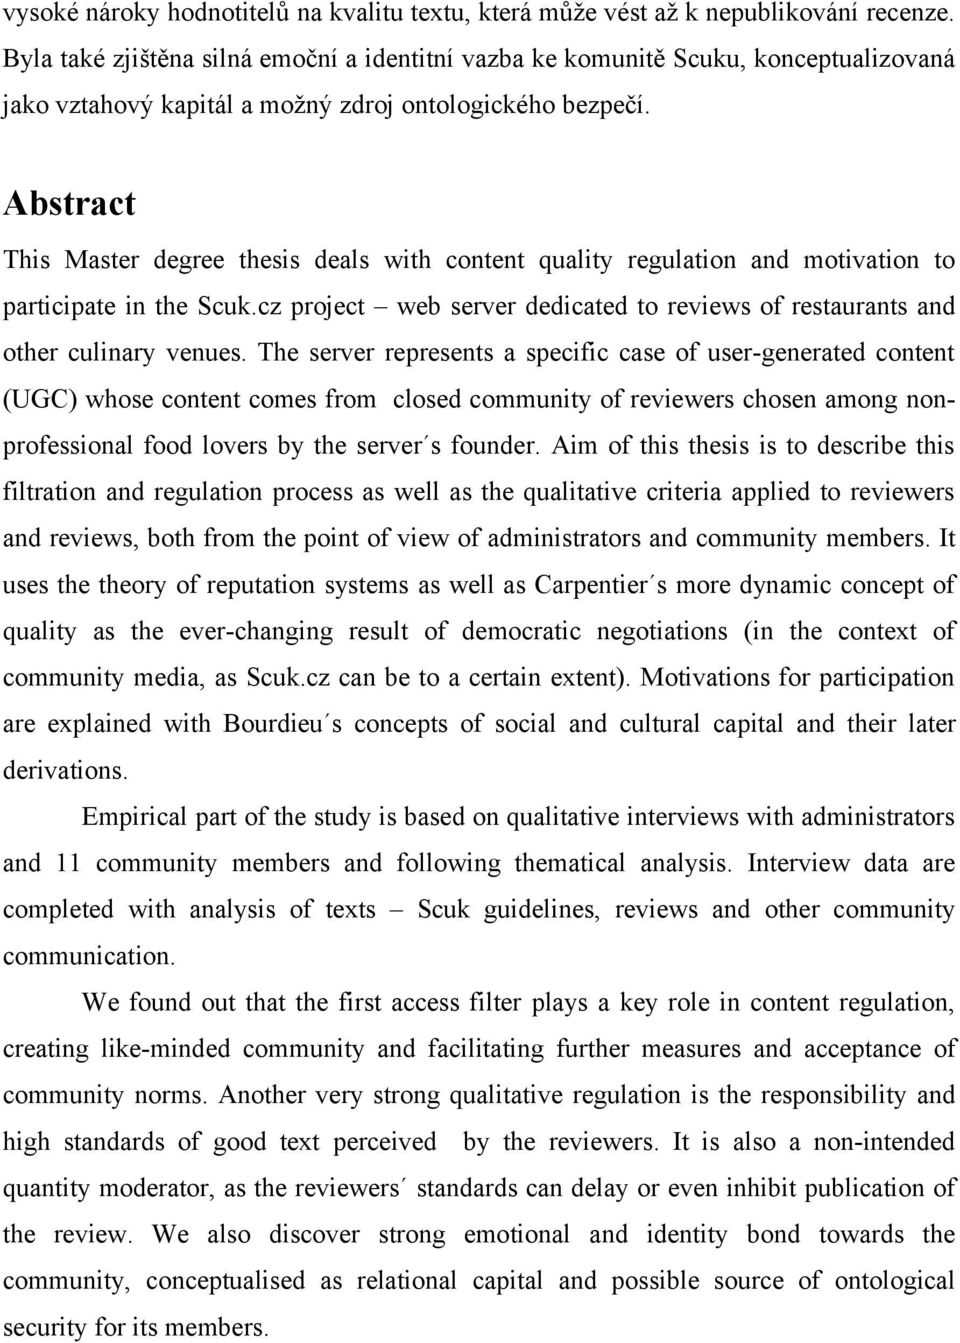 Abstract This Master degree thesis deals with content quality regulation and motivation to participate in the Scuk.cz project web server dedicated to reviews of restaurants and other culinary venues.